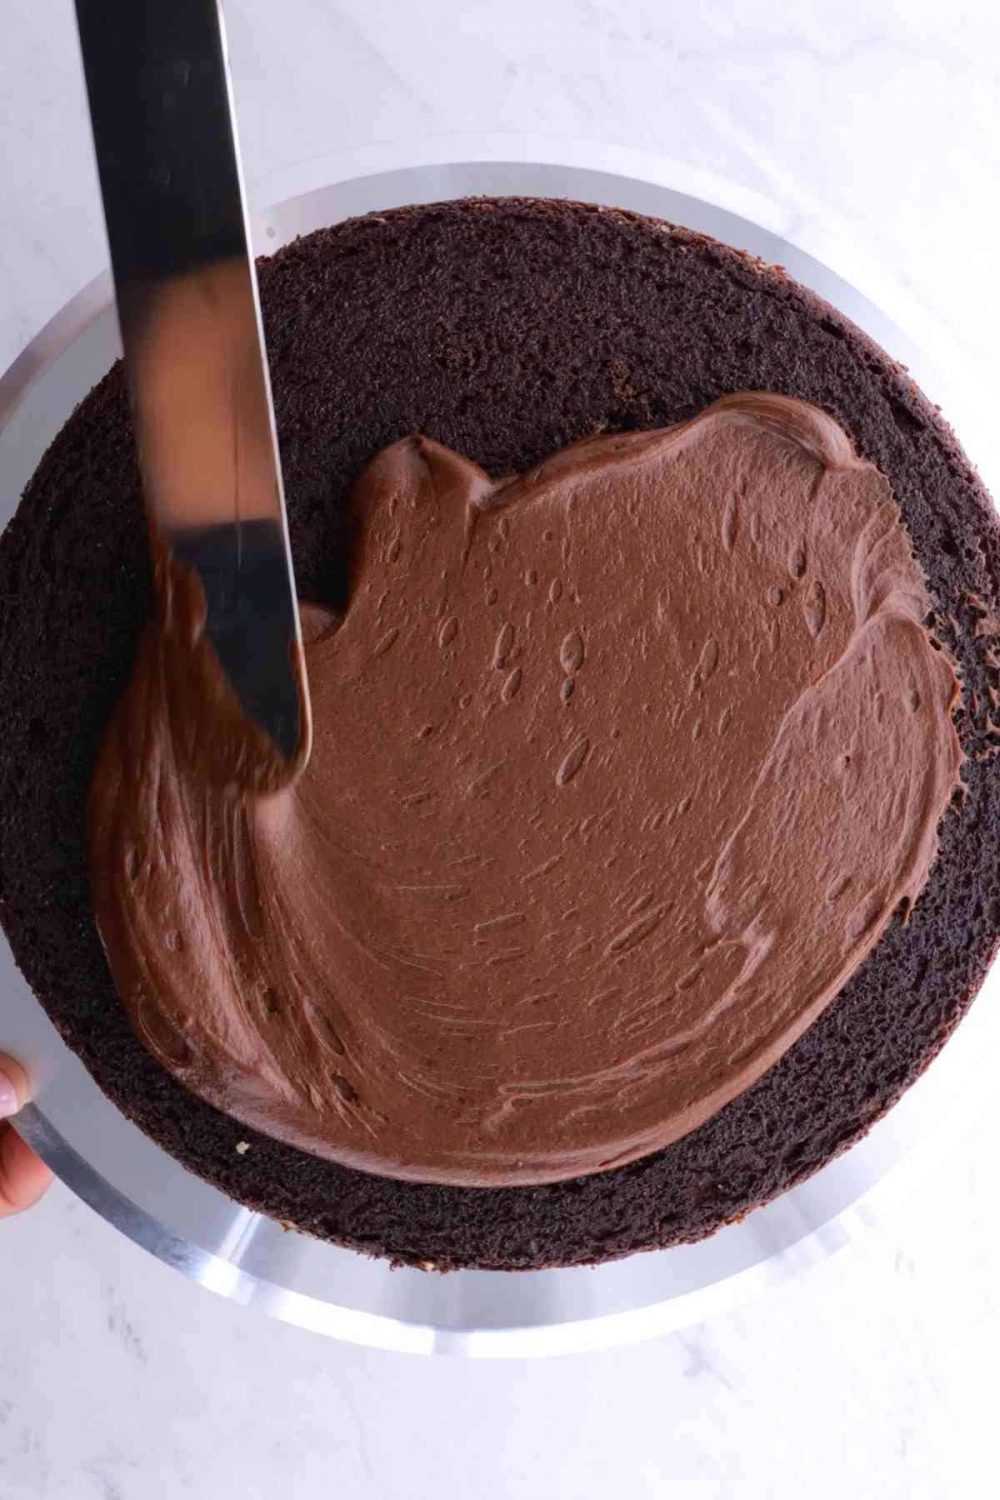 Decadent Chocolate Bliss: Irresistible Rich Chocolate Frosting